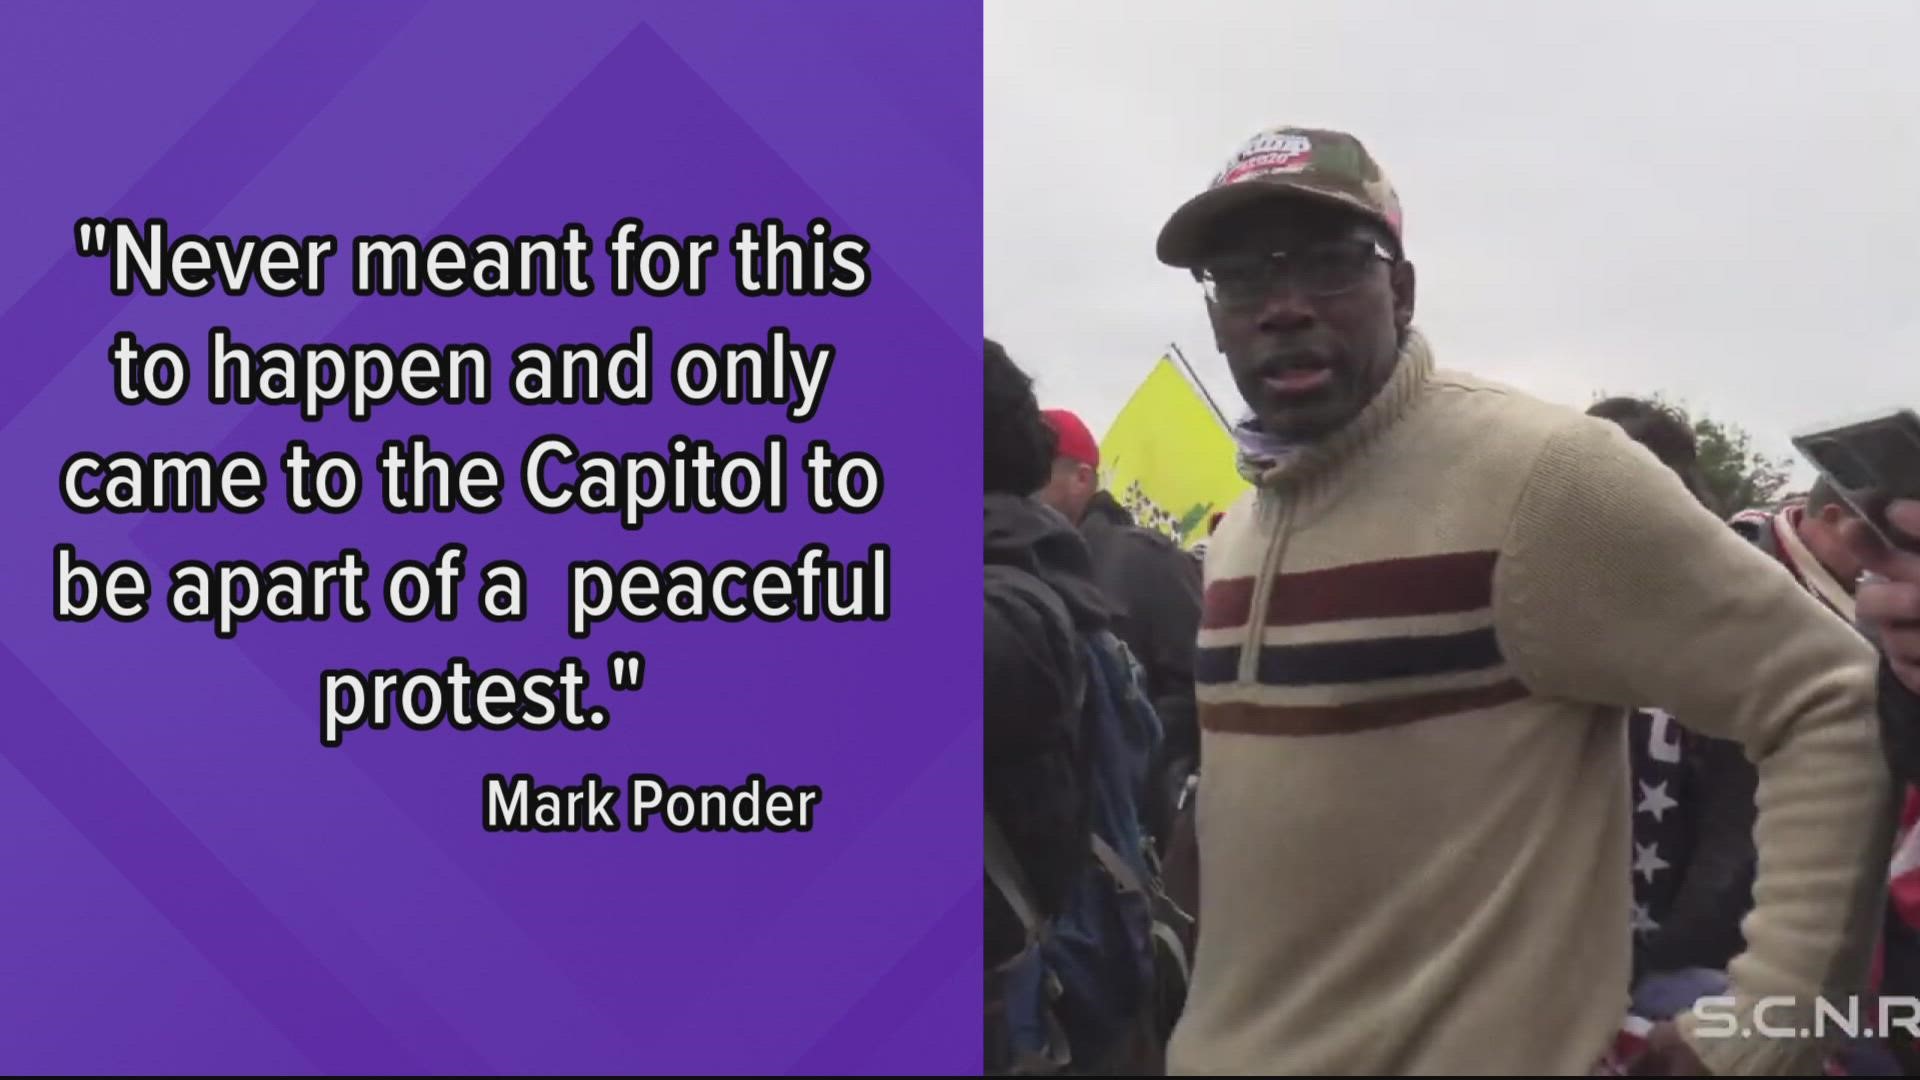 Mark K. Ponder, of Northwest, pleaded guilty in April and was sentenced Tuesday to one of the longest prison terms to date stemming from the Capitol riot.